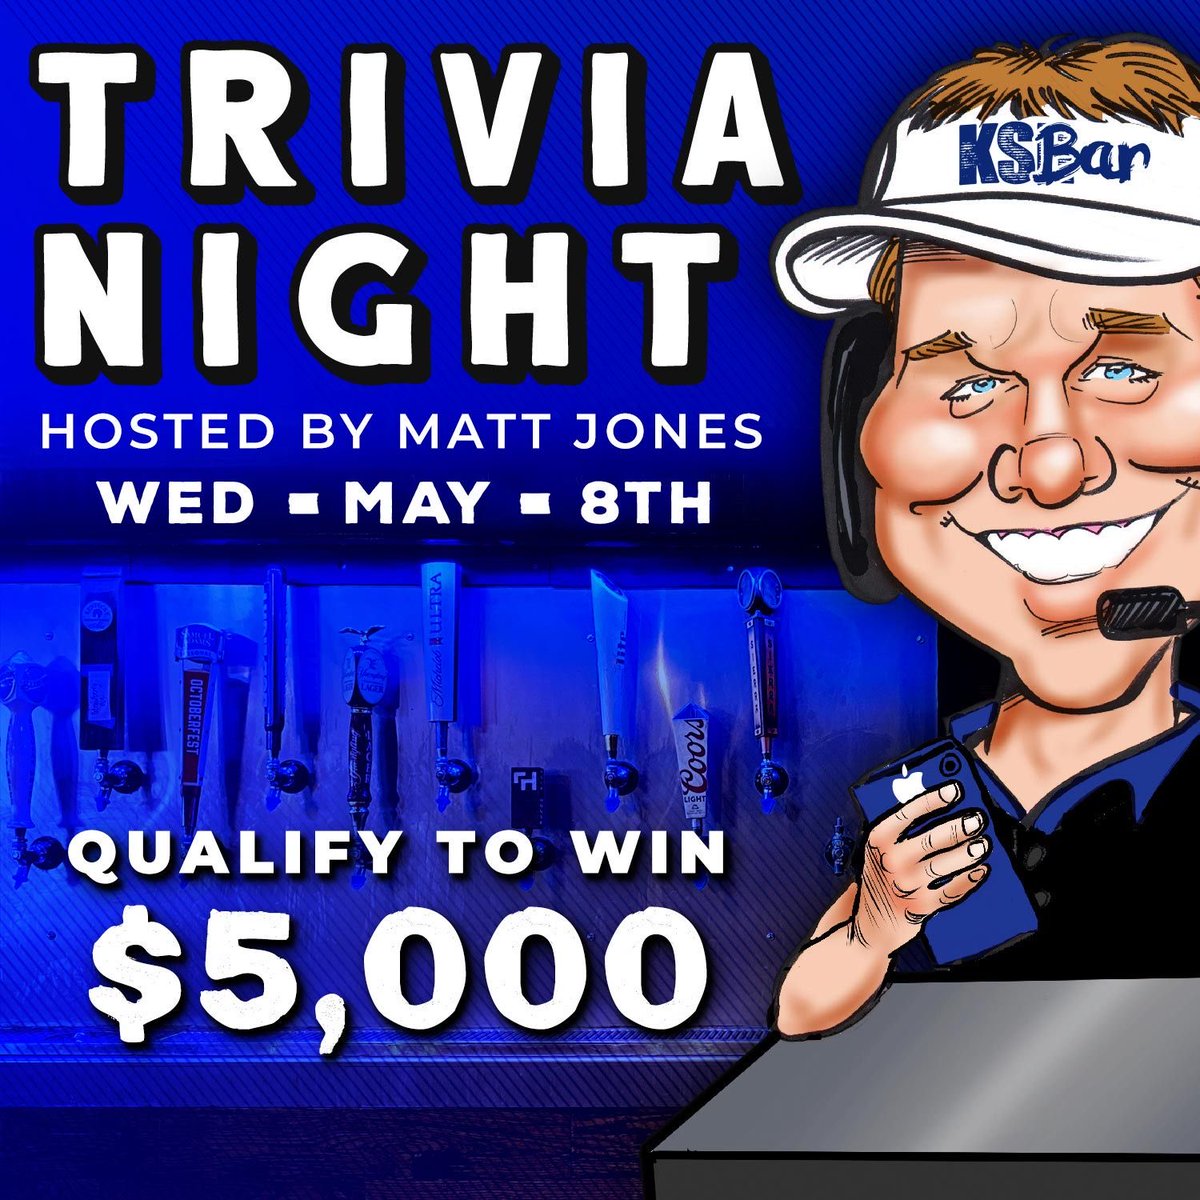 The FINAL Qualifier for the $5,000 Trivia contest is WEDNESDAY Night. Get your team and come compete for the big prize!!!!